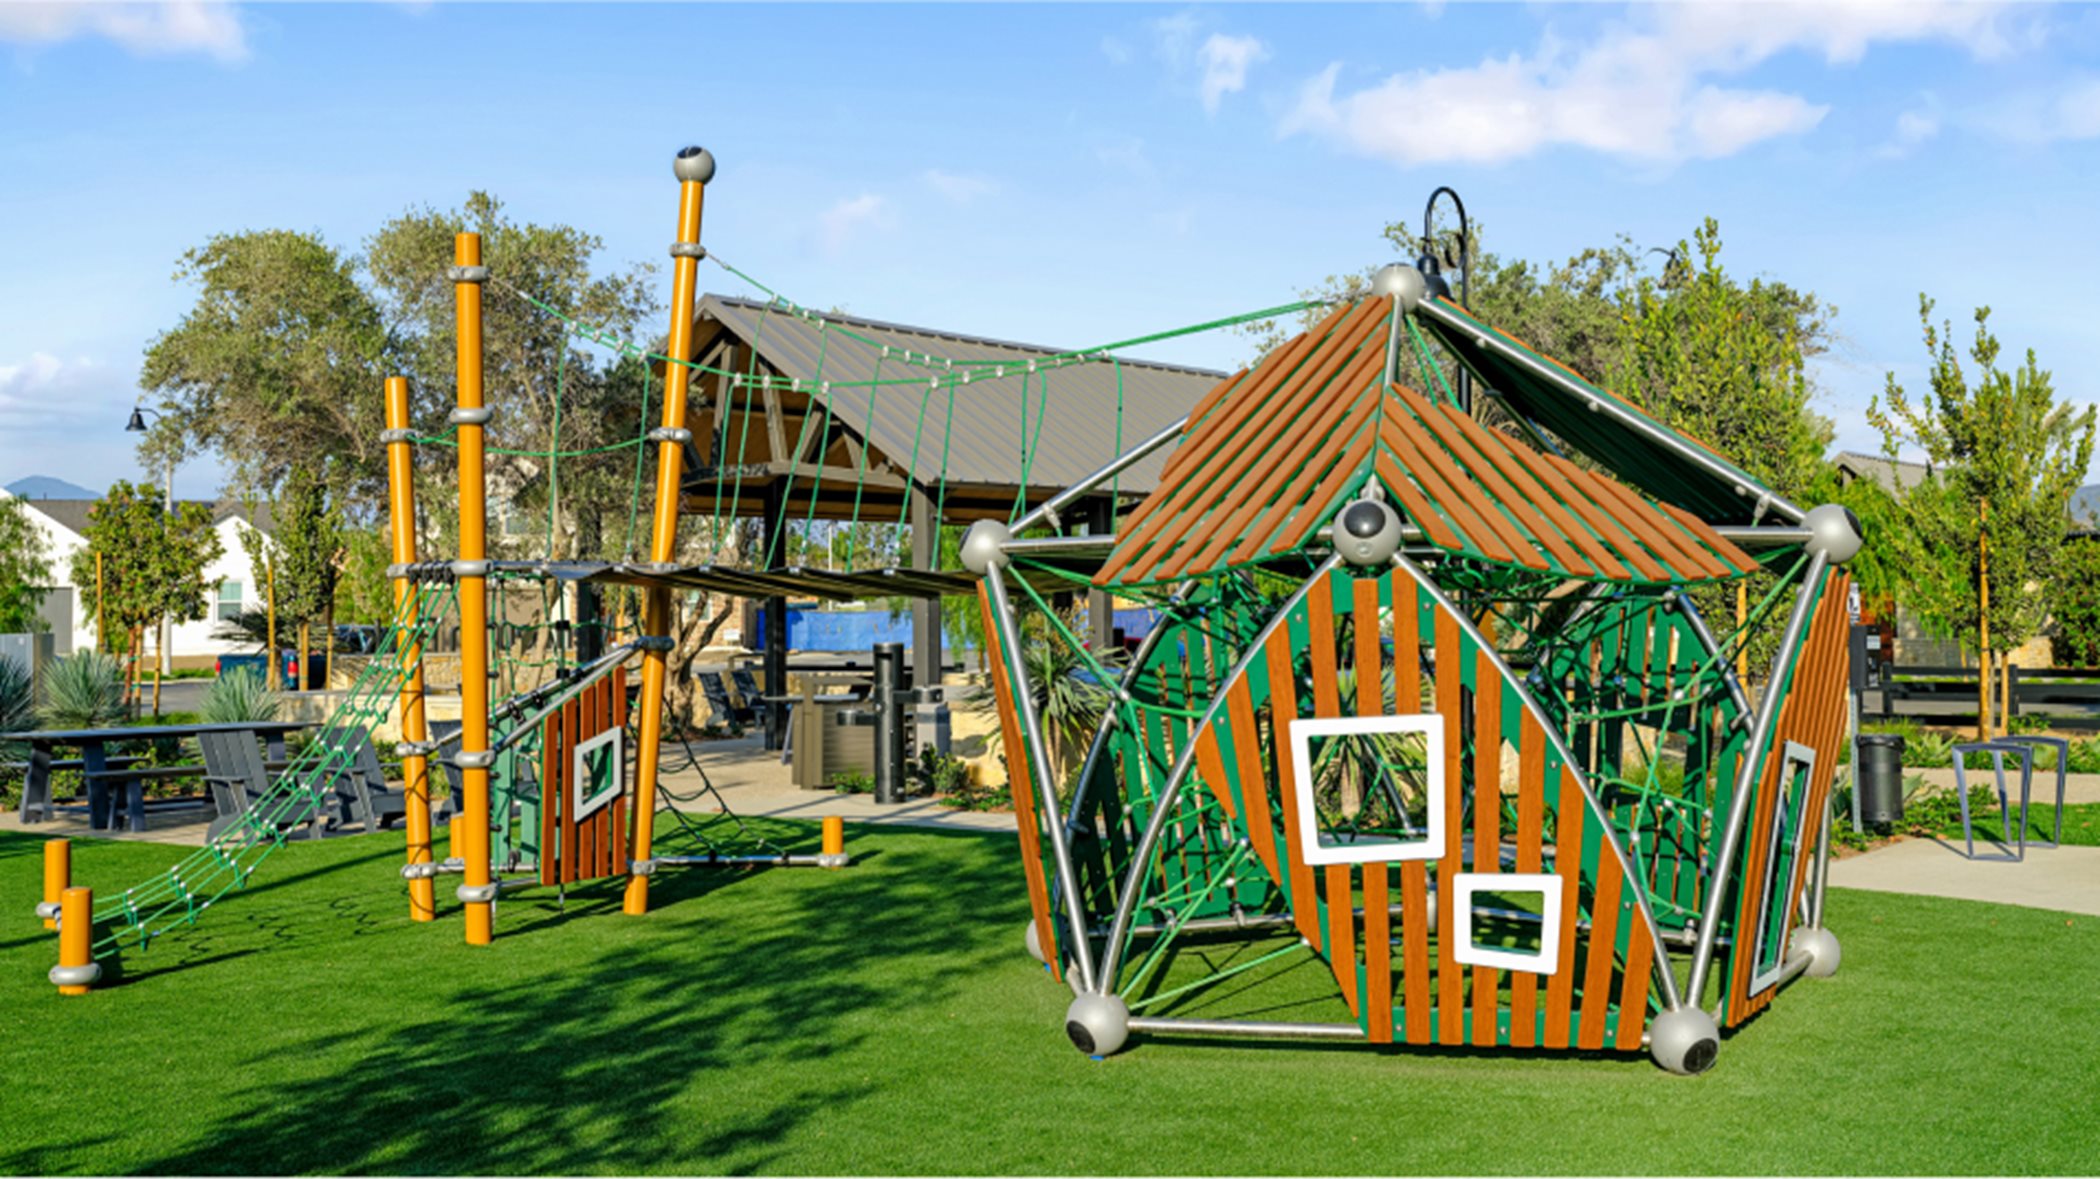 Tot lot play structures